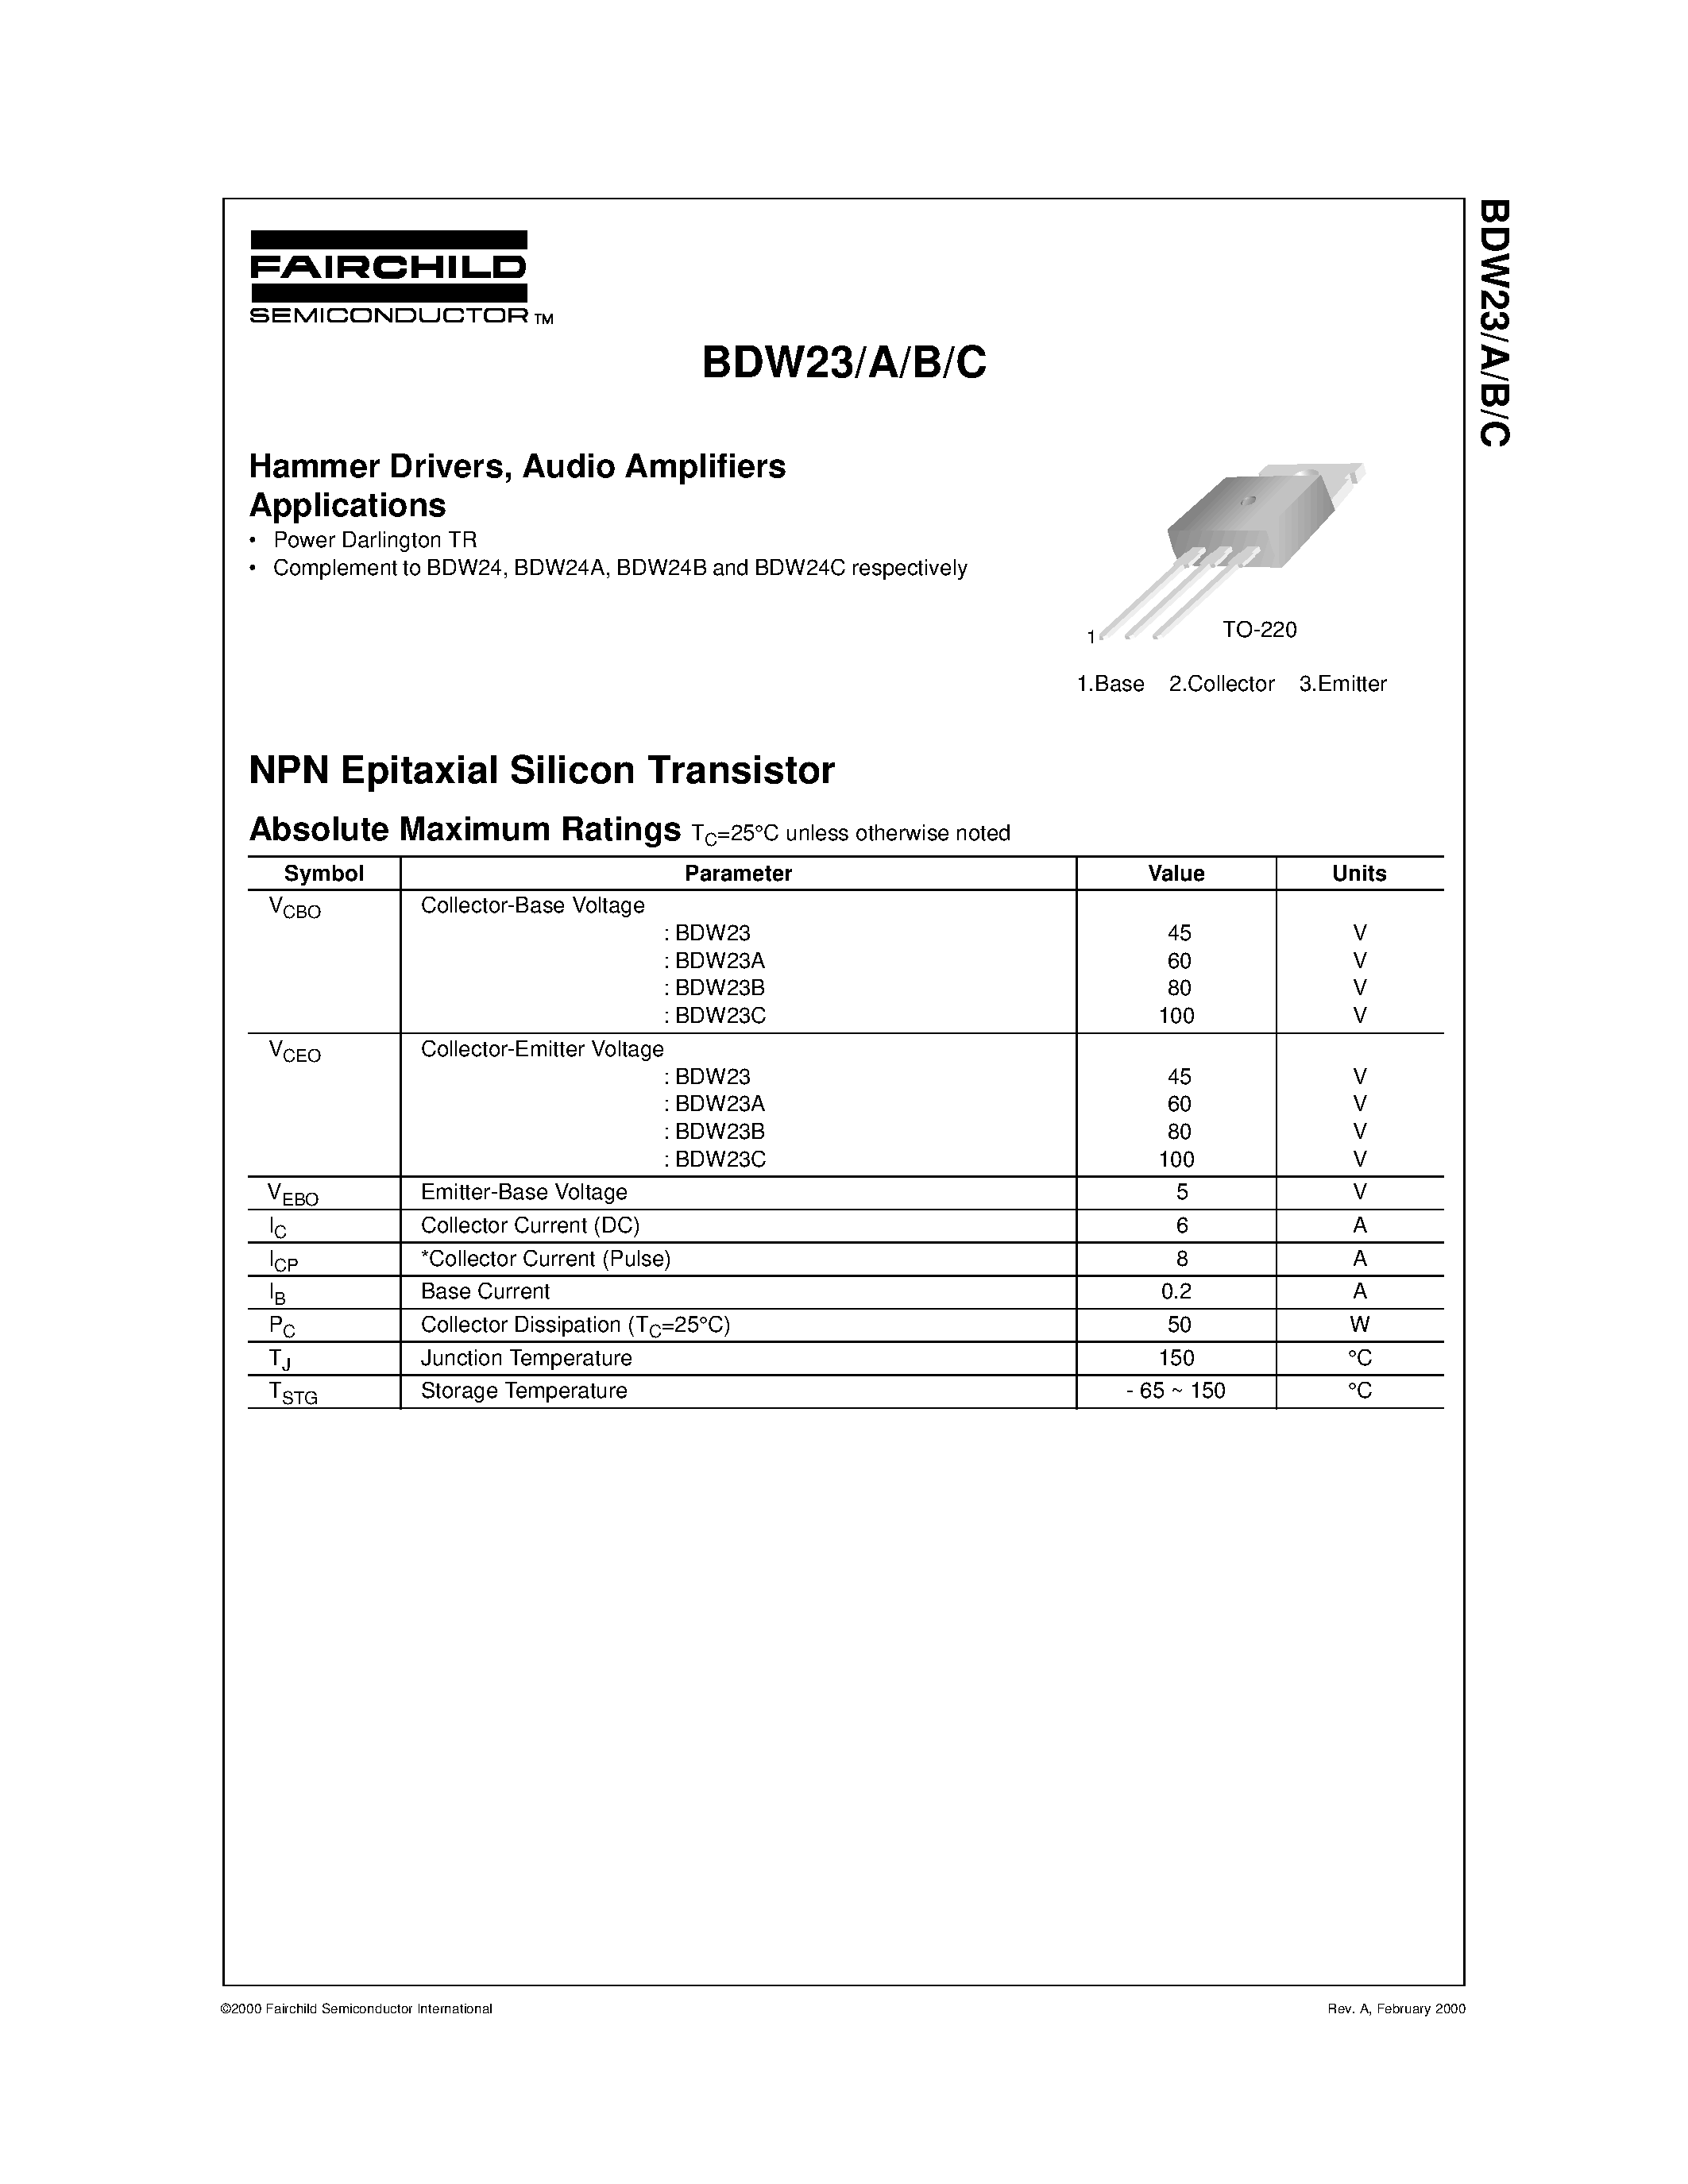 Datasheet BDW23B - Hammer Drivers/ Audio Amplifiers Applications page 1